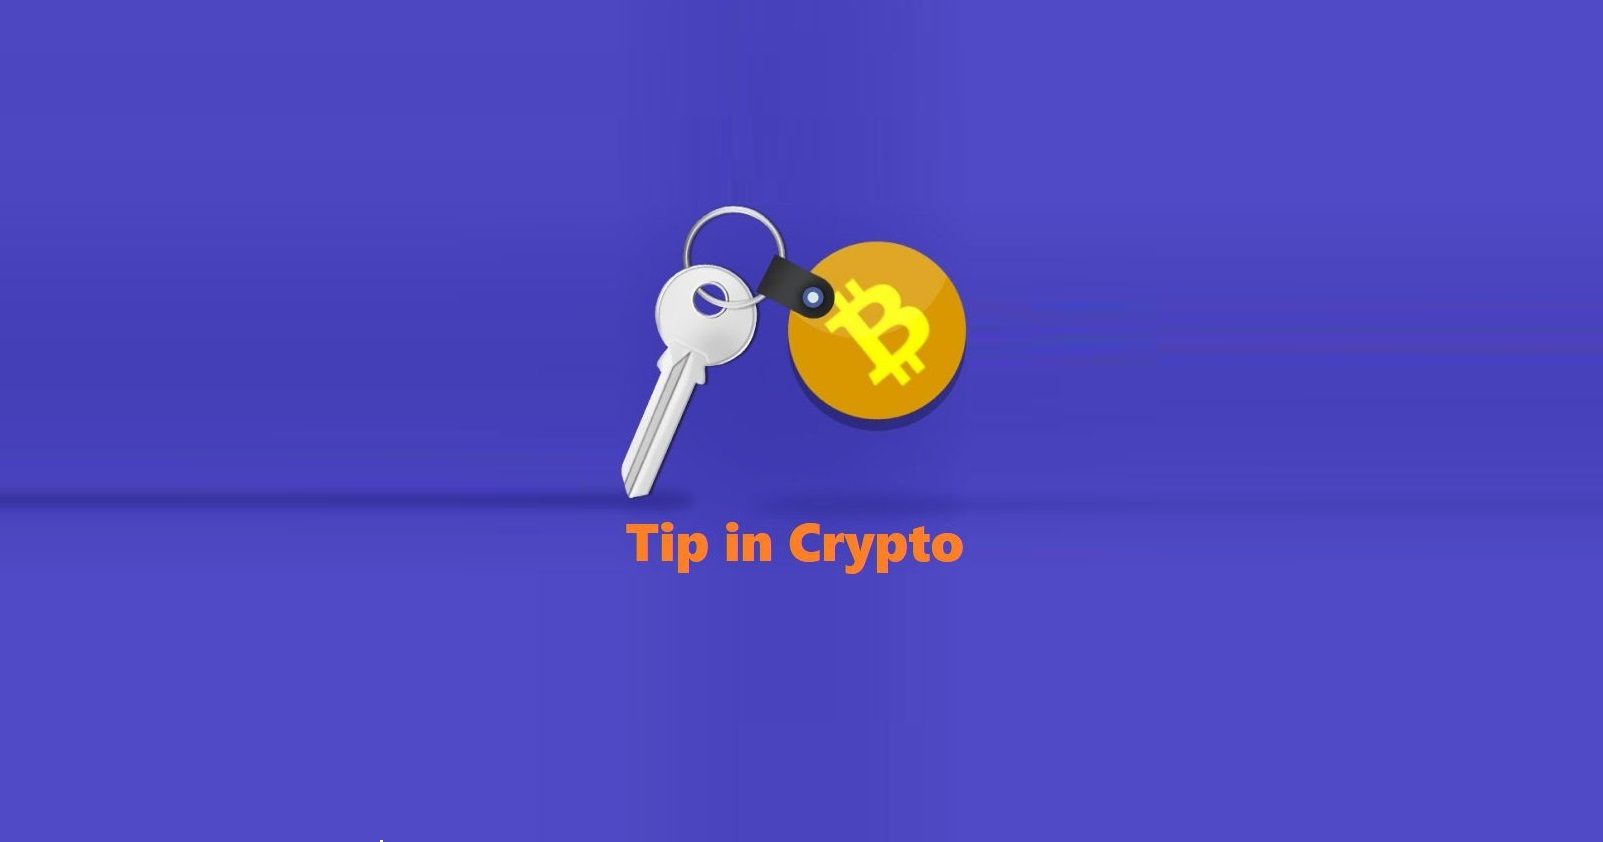 crypto tip, cryptocurrency tipping, bitcoin tip